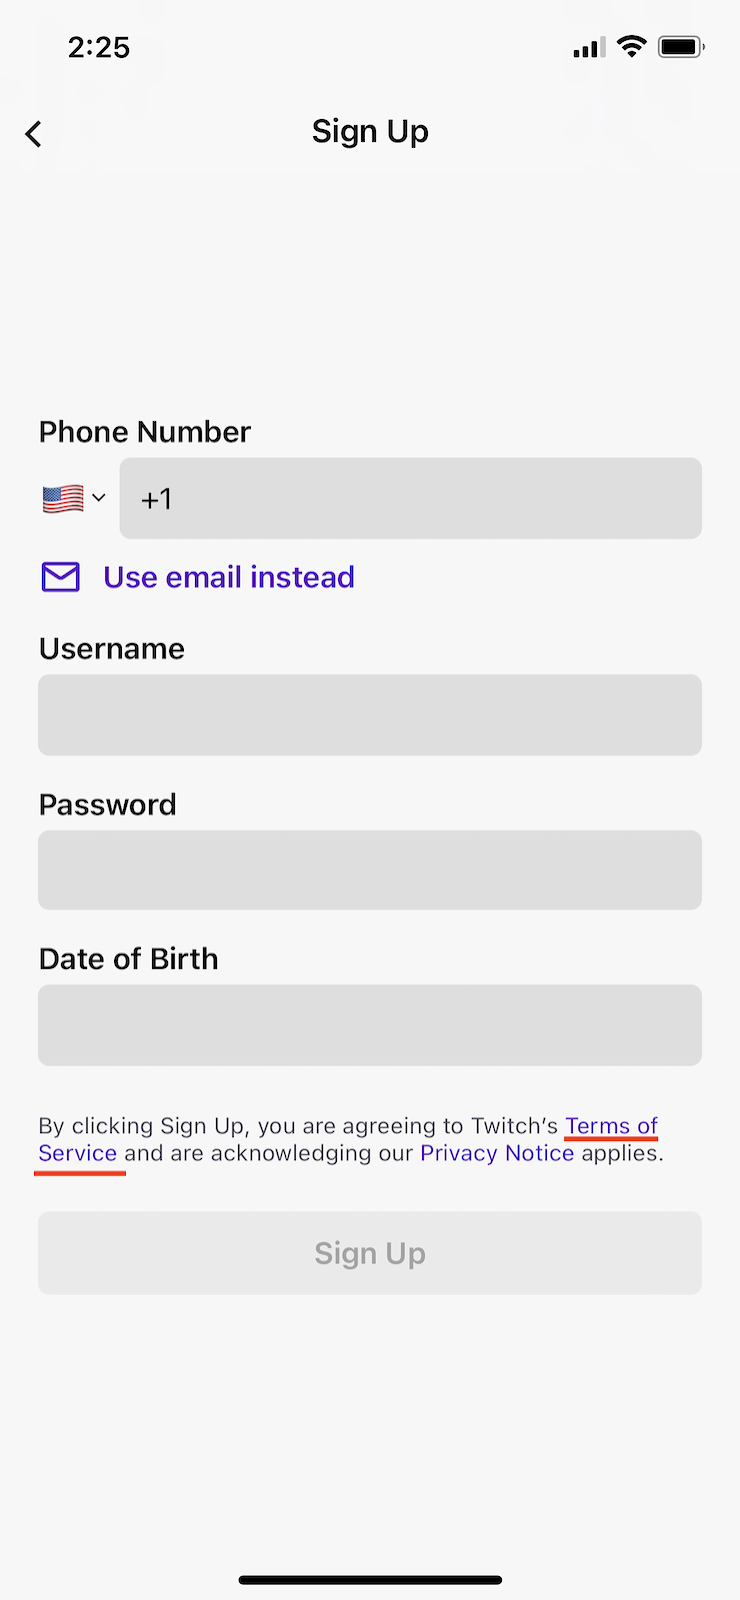 Twitch-mobile-app-terms-and-conditions-display-new-users-sign-up